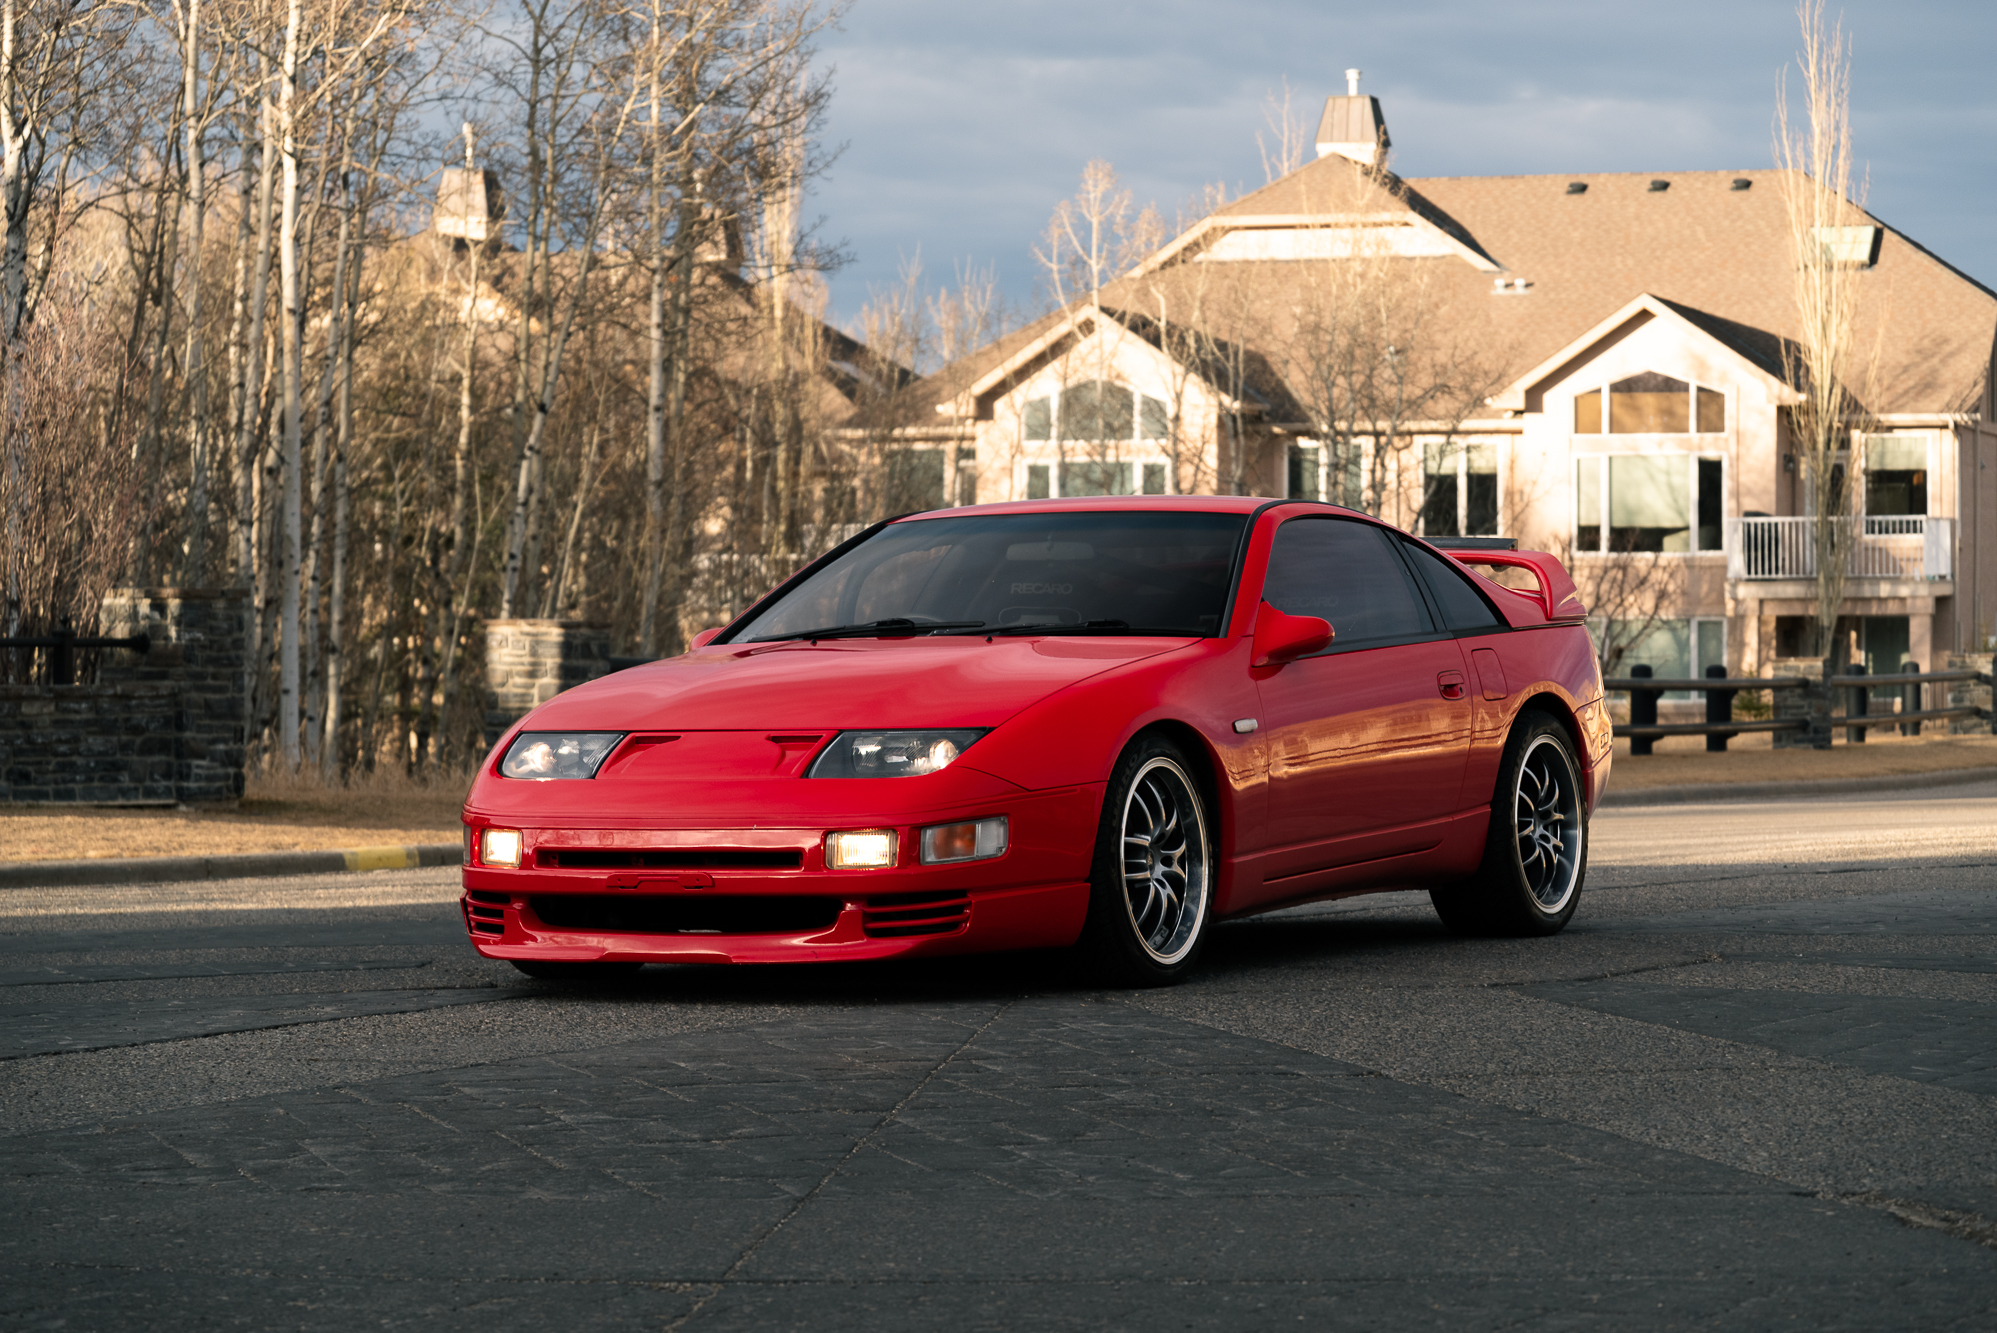 1991 NISSAN 300ZX TWIN TURBO for sale by auction in Calgary, AB 